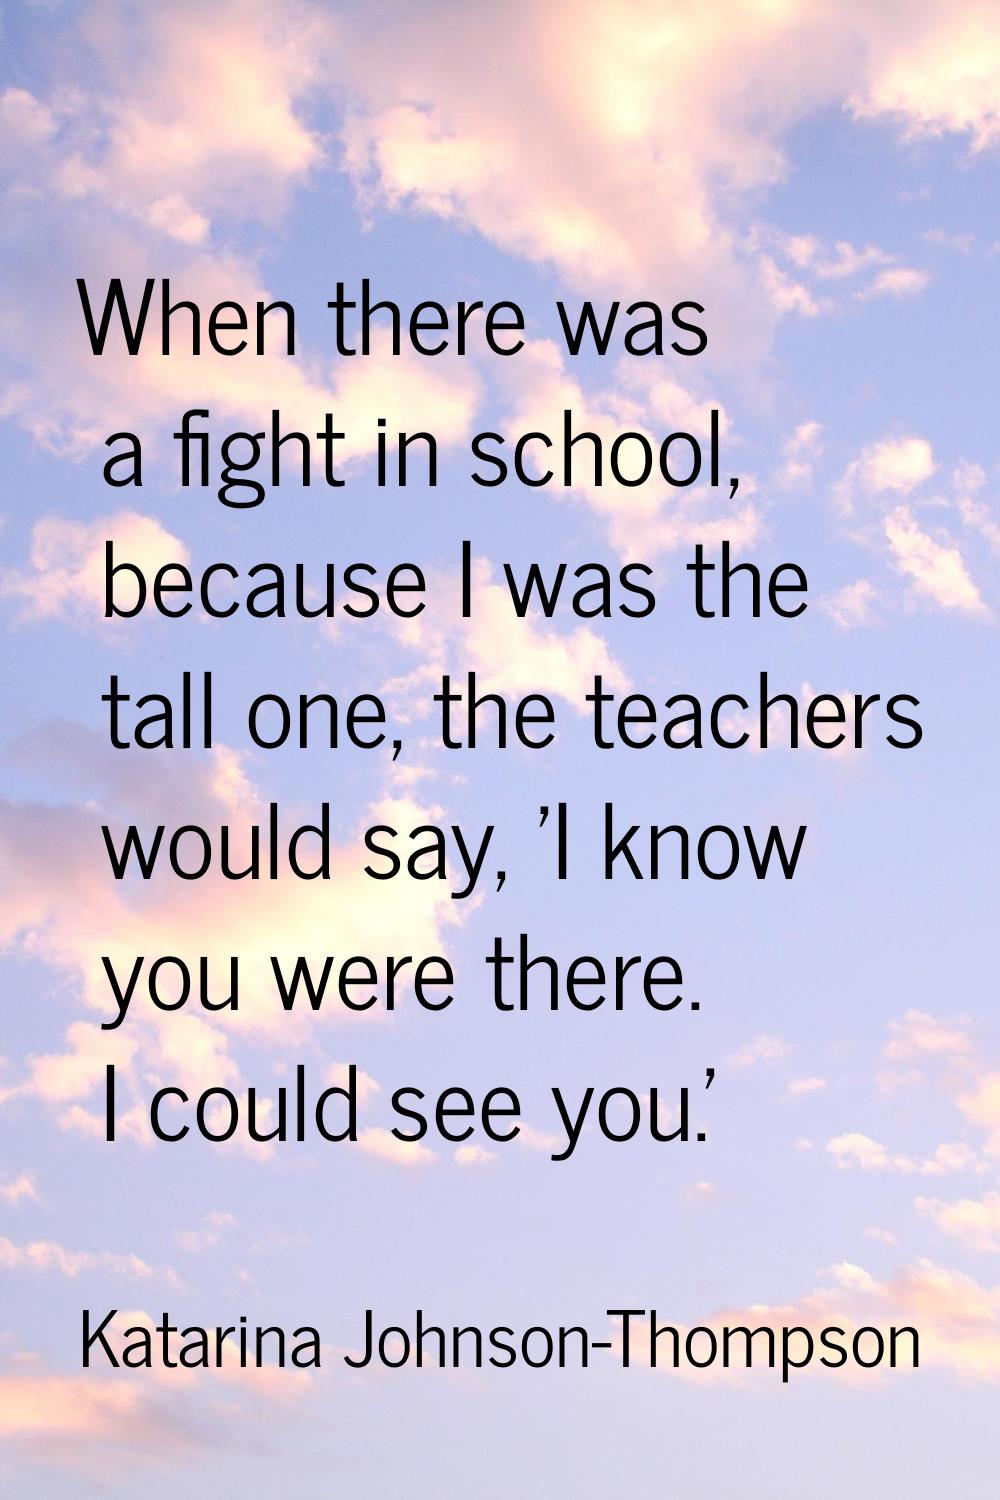 When there was a fight in school, because I was the tall one, the teachers would say, 'I know you w